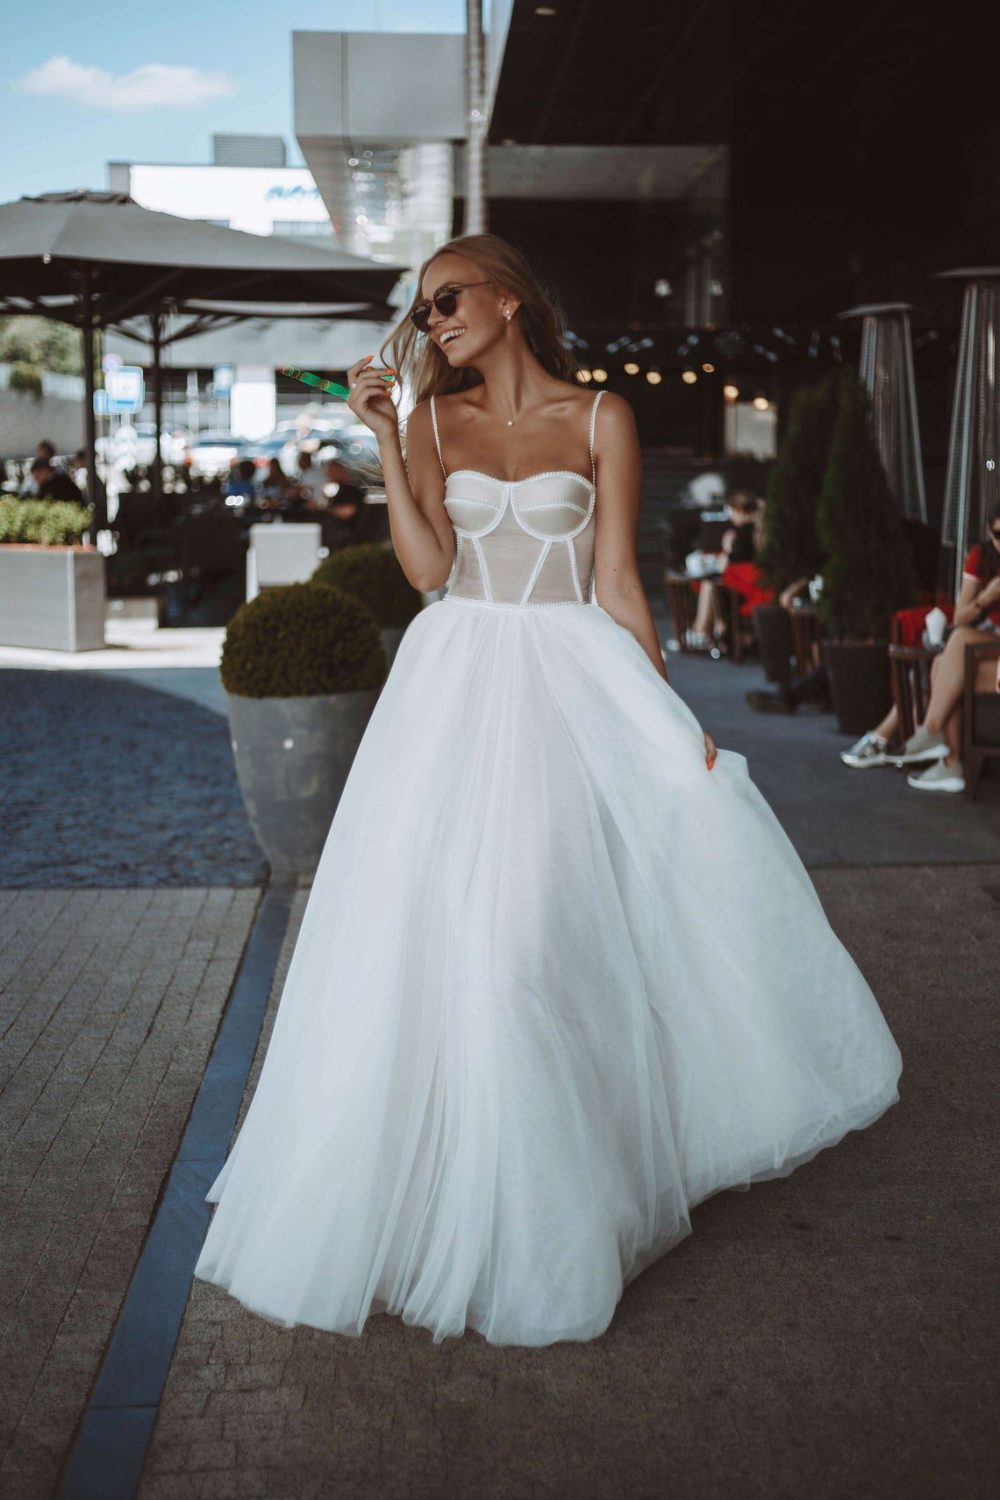 Rara Avis elegant A-line wedding dress Yang with the tulle skirt and fitted bodice with the sweetheart neckline and pearls decorations at Dell"Amore Bridal, NZ.5